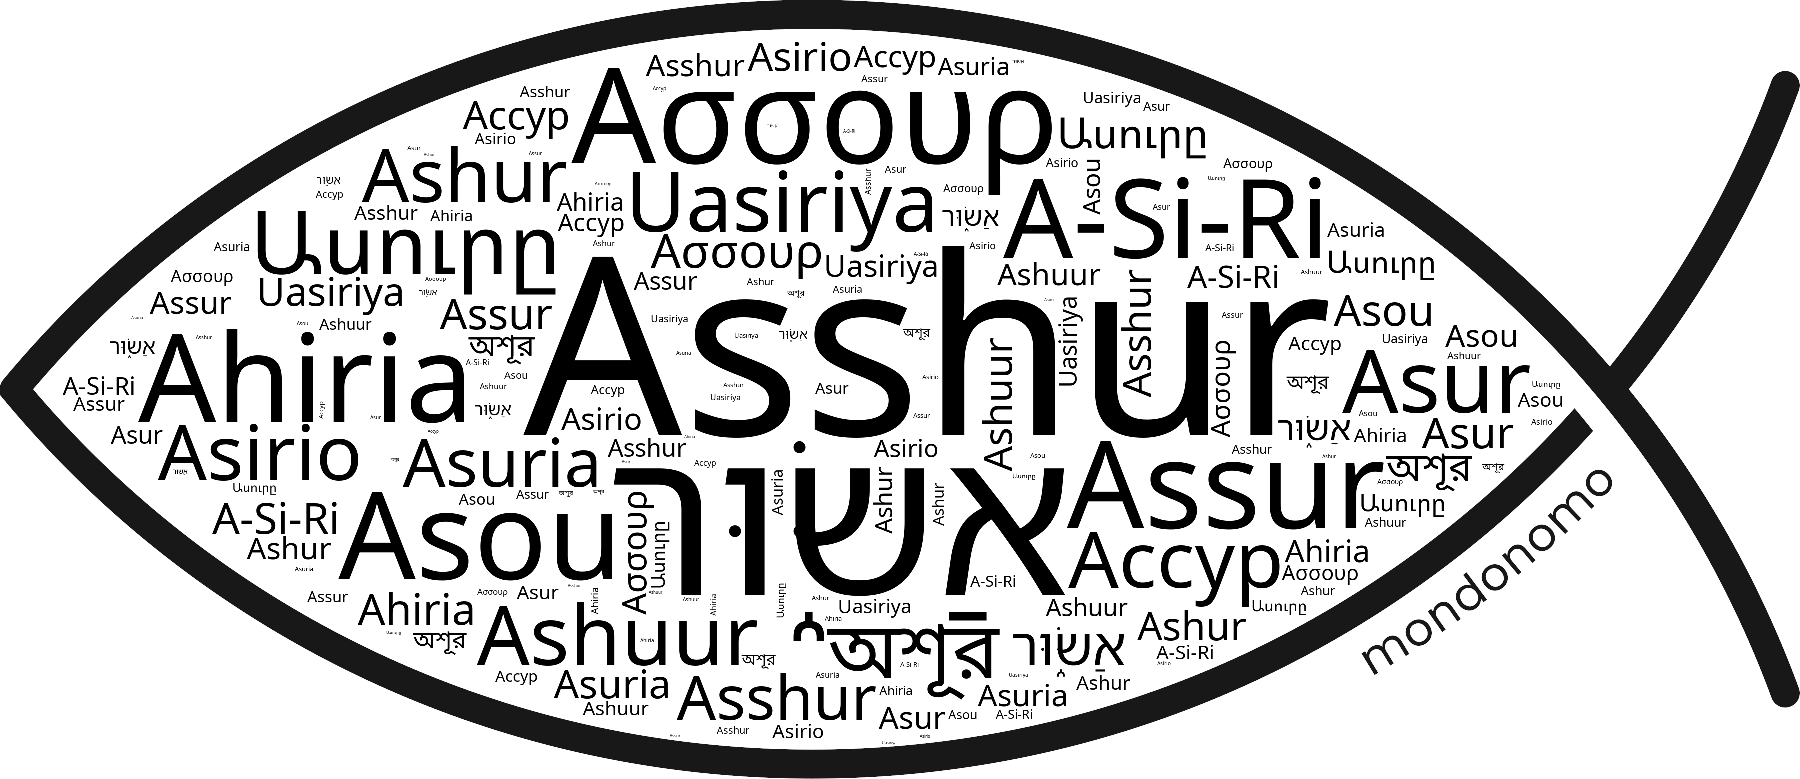 Name Asshur in the world's Bibles